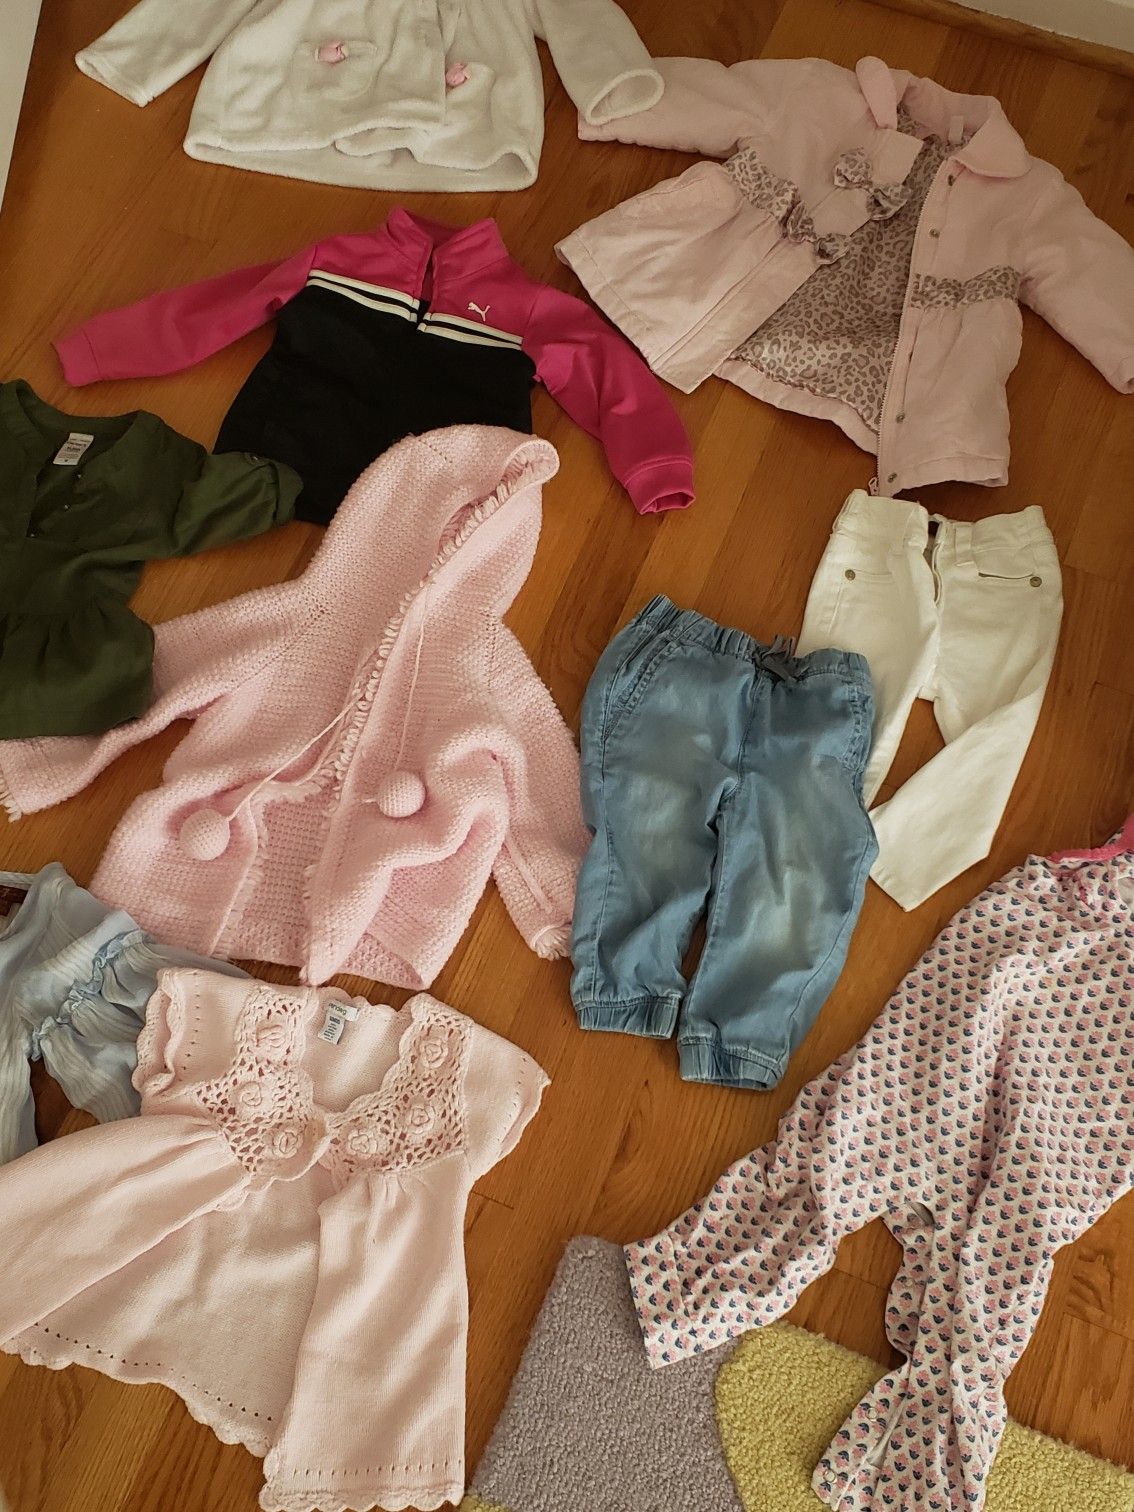 12-18 month baby girl clothes and coats